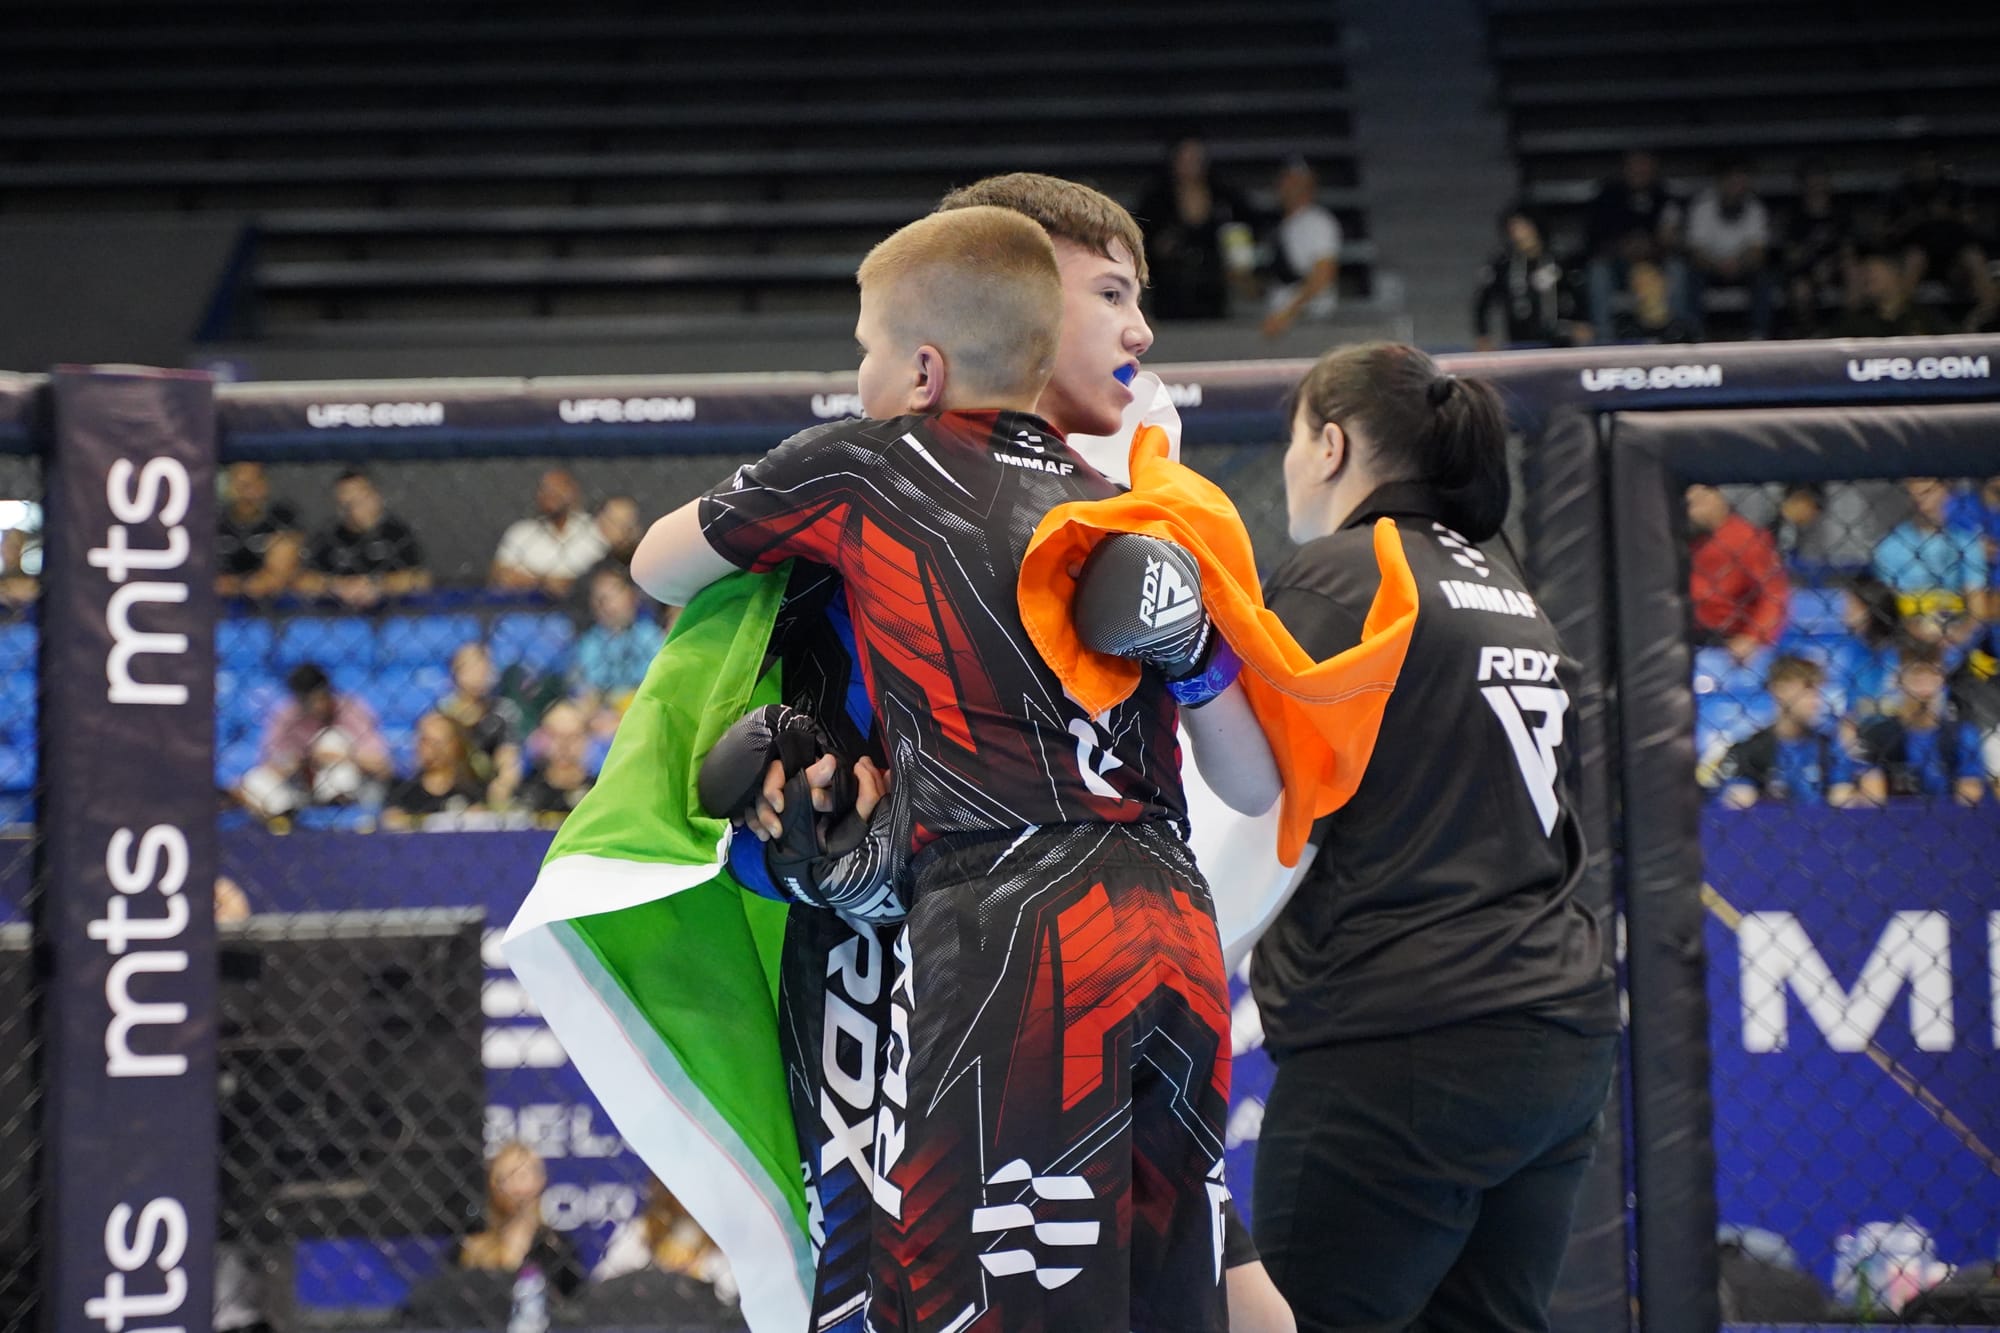 Youth MMA Grading: Assimilation into the Culture of Martial Arts